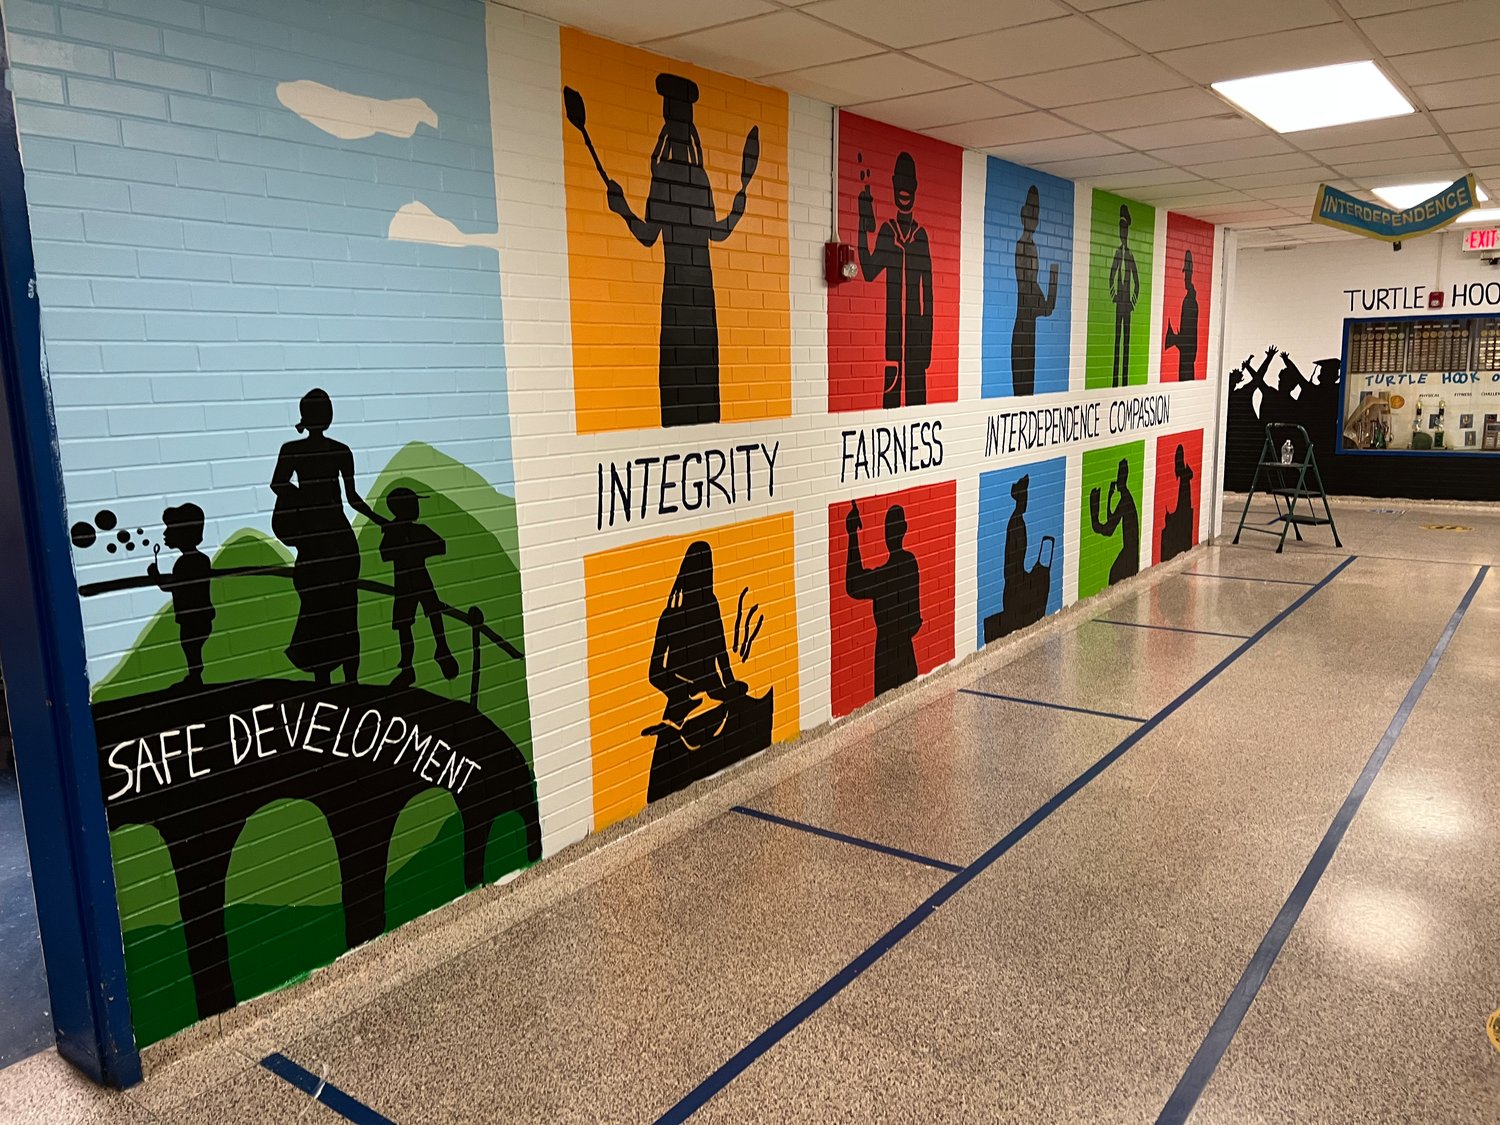 Strong values and symbolic shapes now speak from the walls of Turtle Hook Middle School.